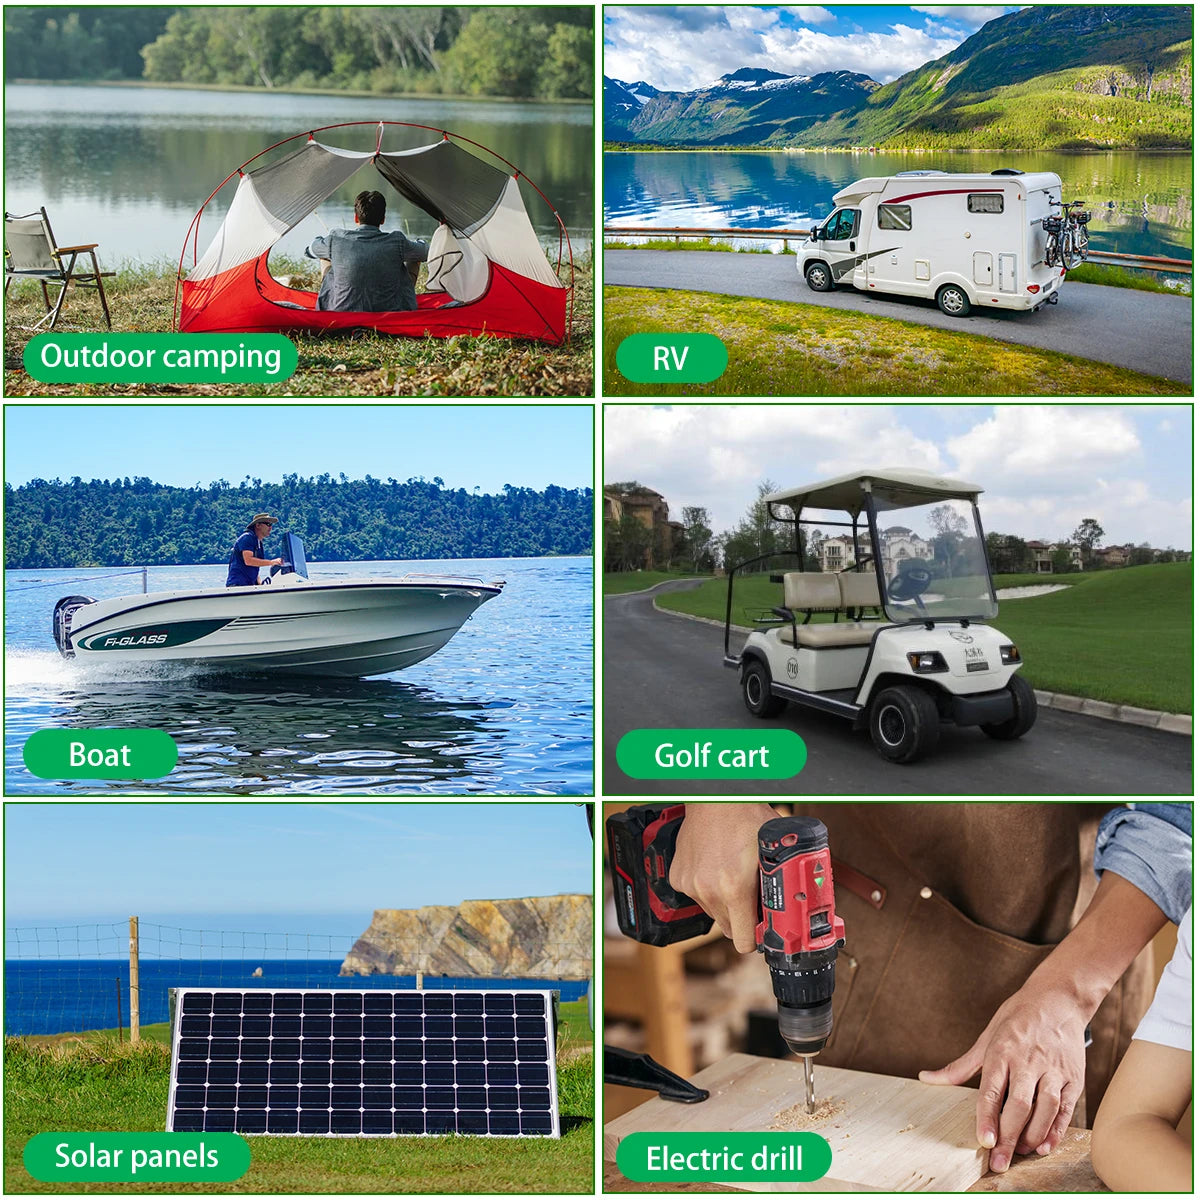 24V 200AH LiFePO4 Battery, Outdoor use: camping, RVs, boats, golf carts, and solar-powered systems.